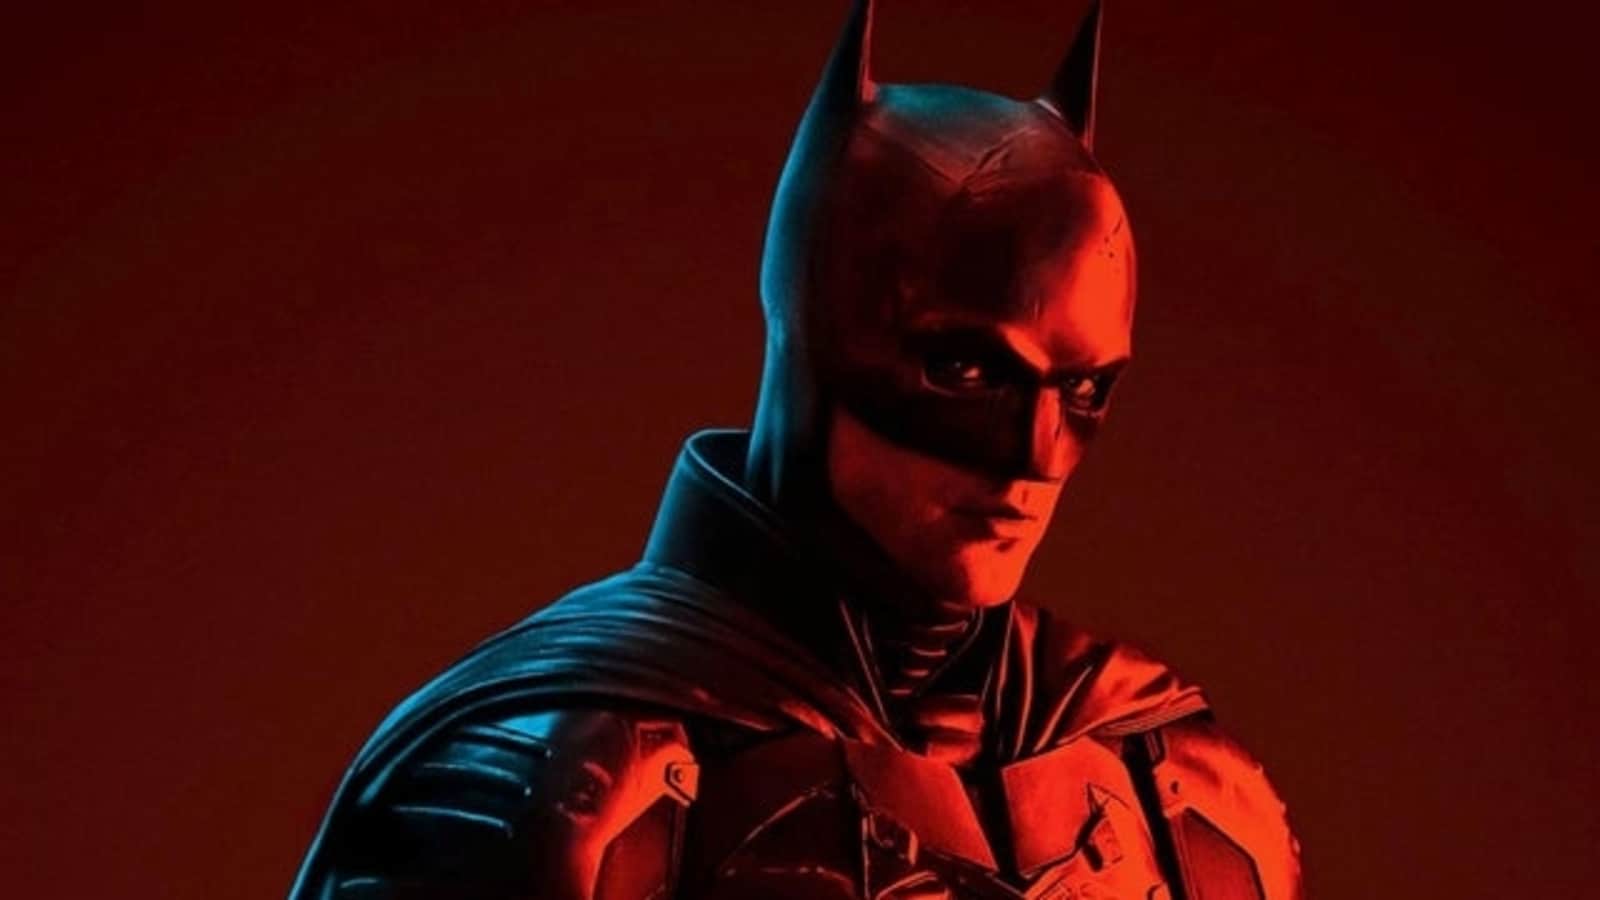 The Batman review: Robert Pattinson, Matt Reeves' film dives into the mind of the bat, and man, like no movie before it